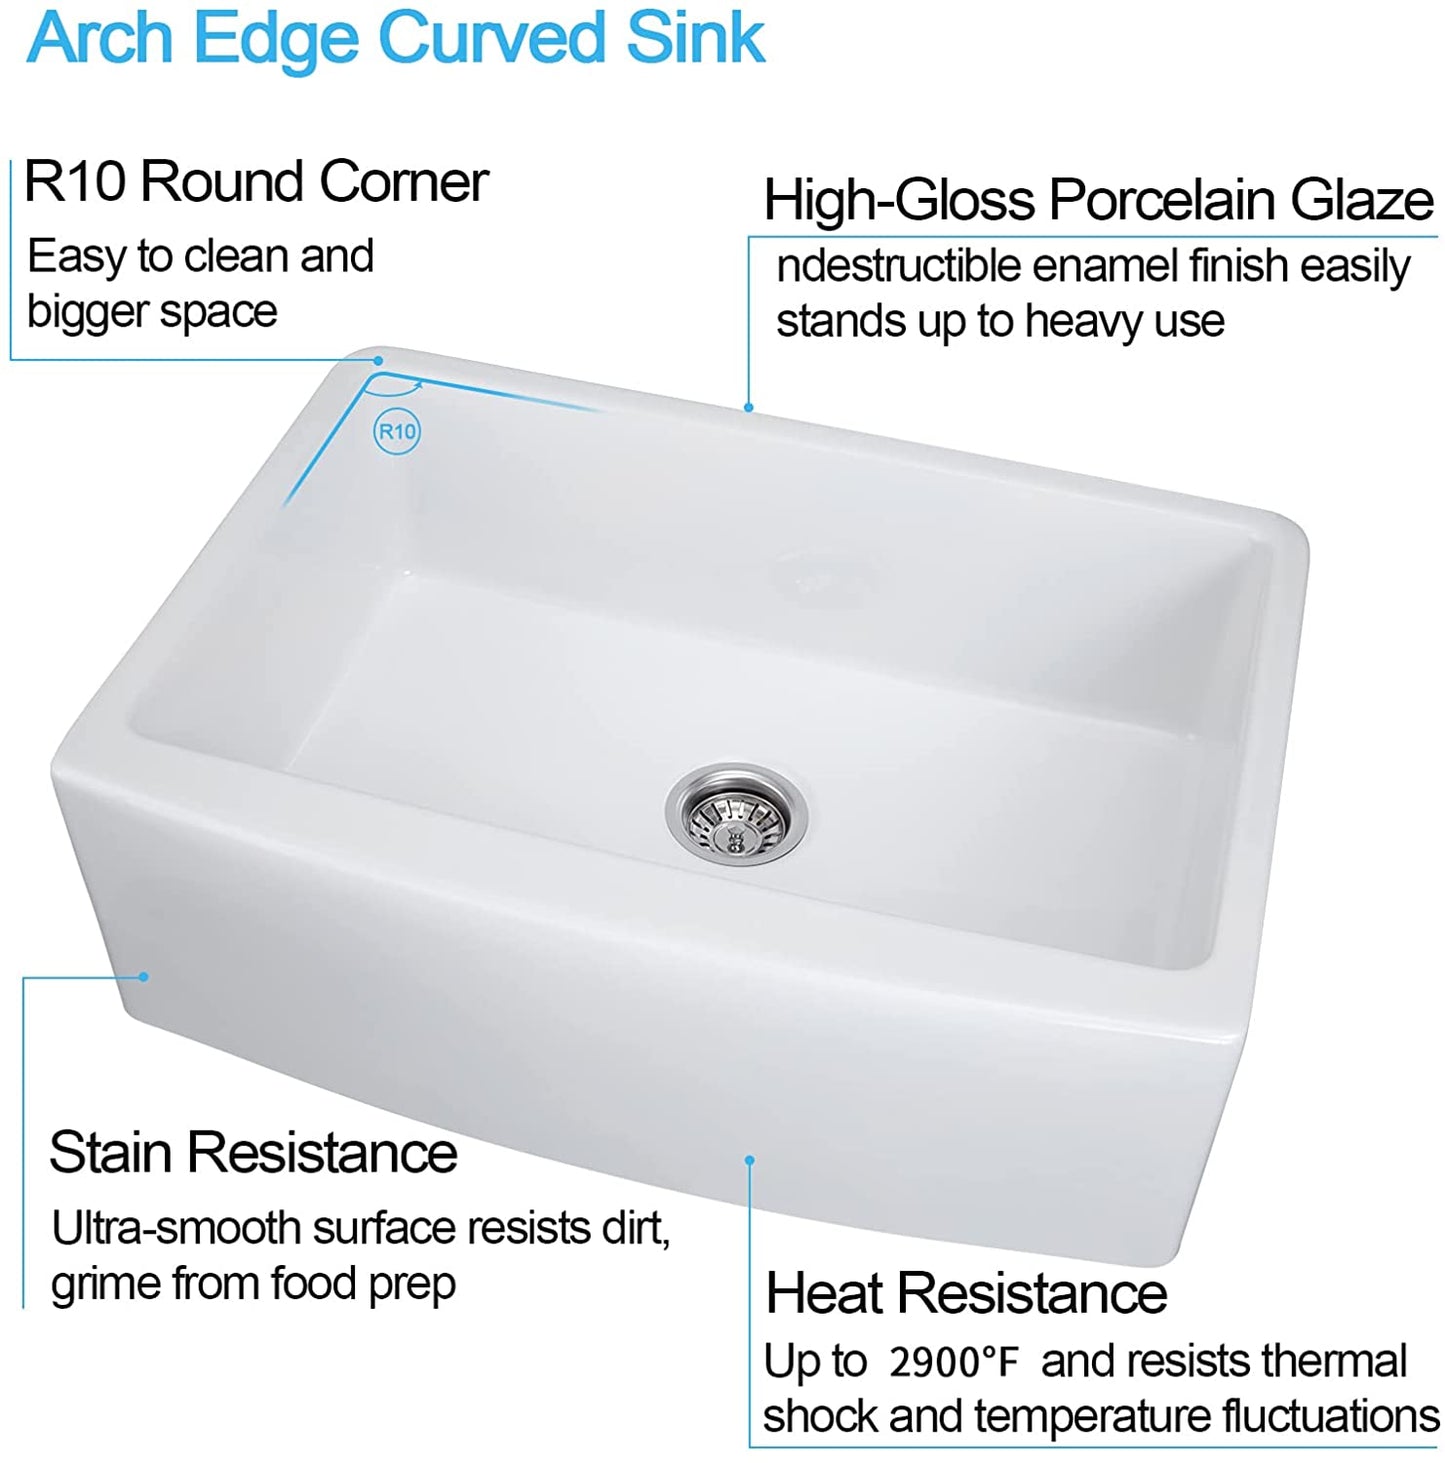 33" X 21" Farmhouse Sink, Fireclay Ceramic Single Bowl Kitchen Sink, White Apron Sink with Protective Bottom Grid and Strainer